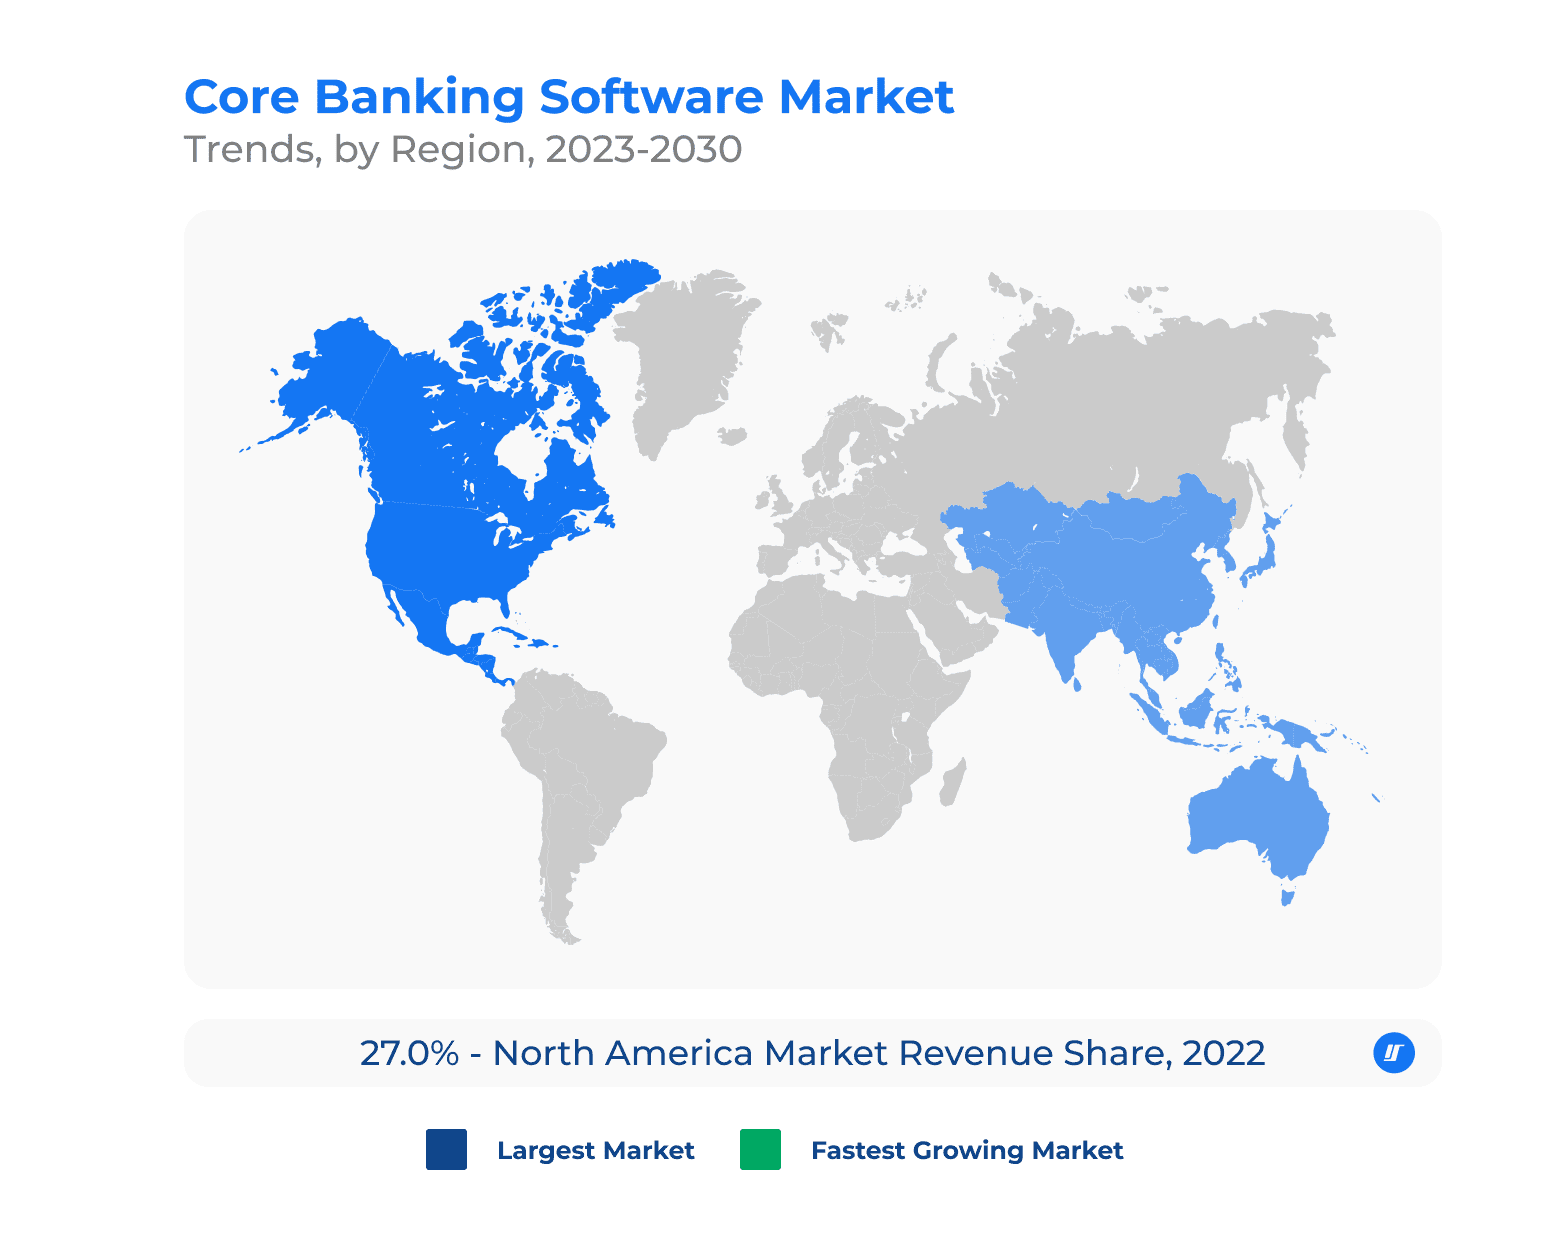 Infographic of the сore banking software market trends by region, 2023-2030